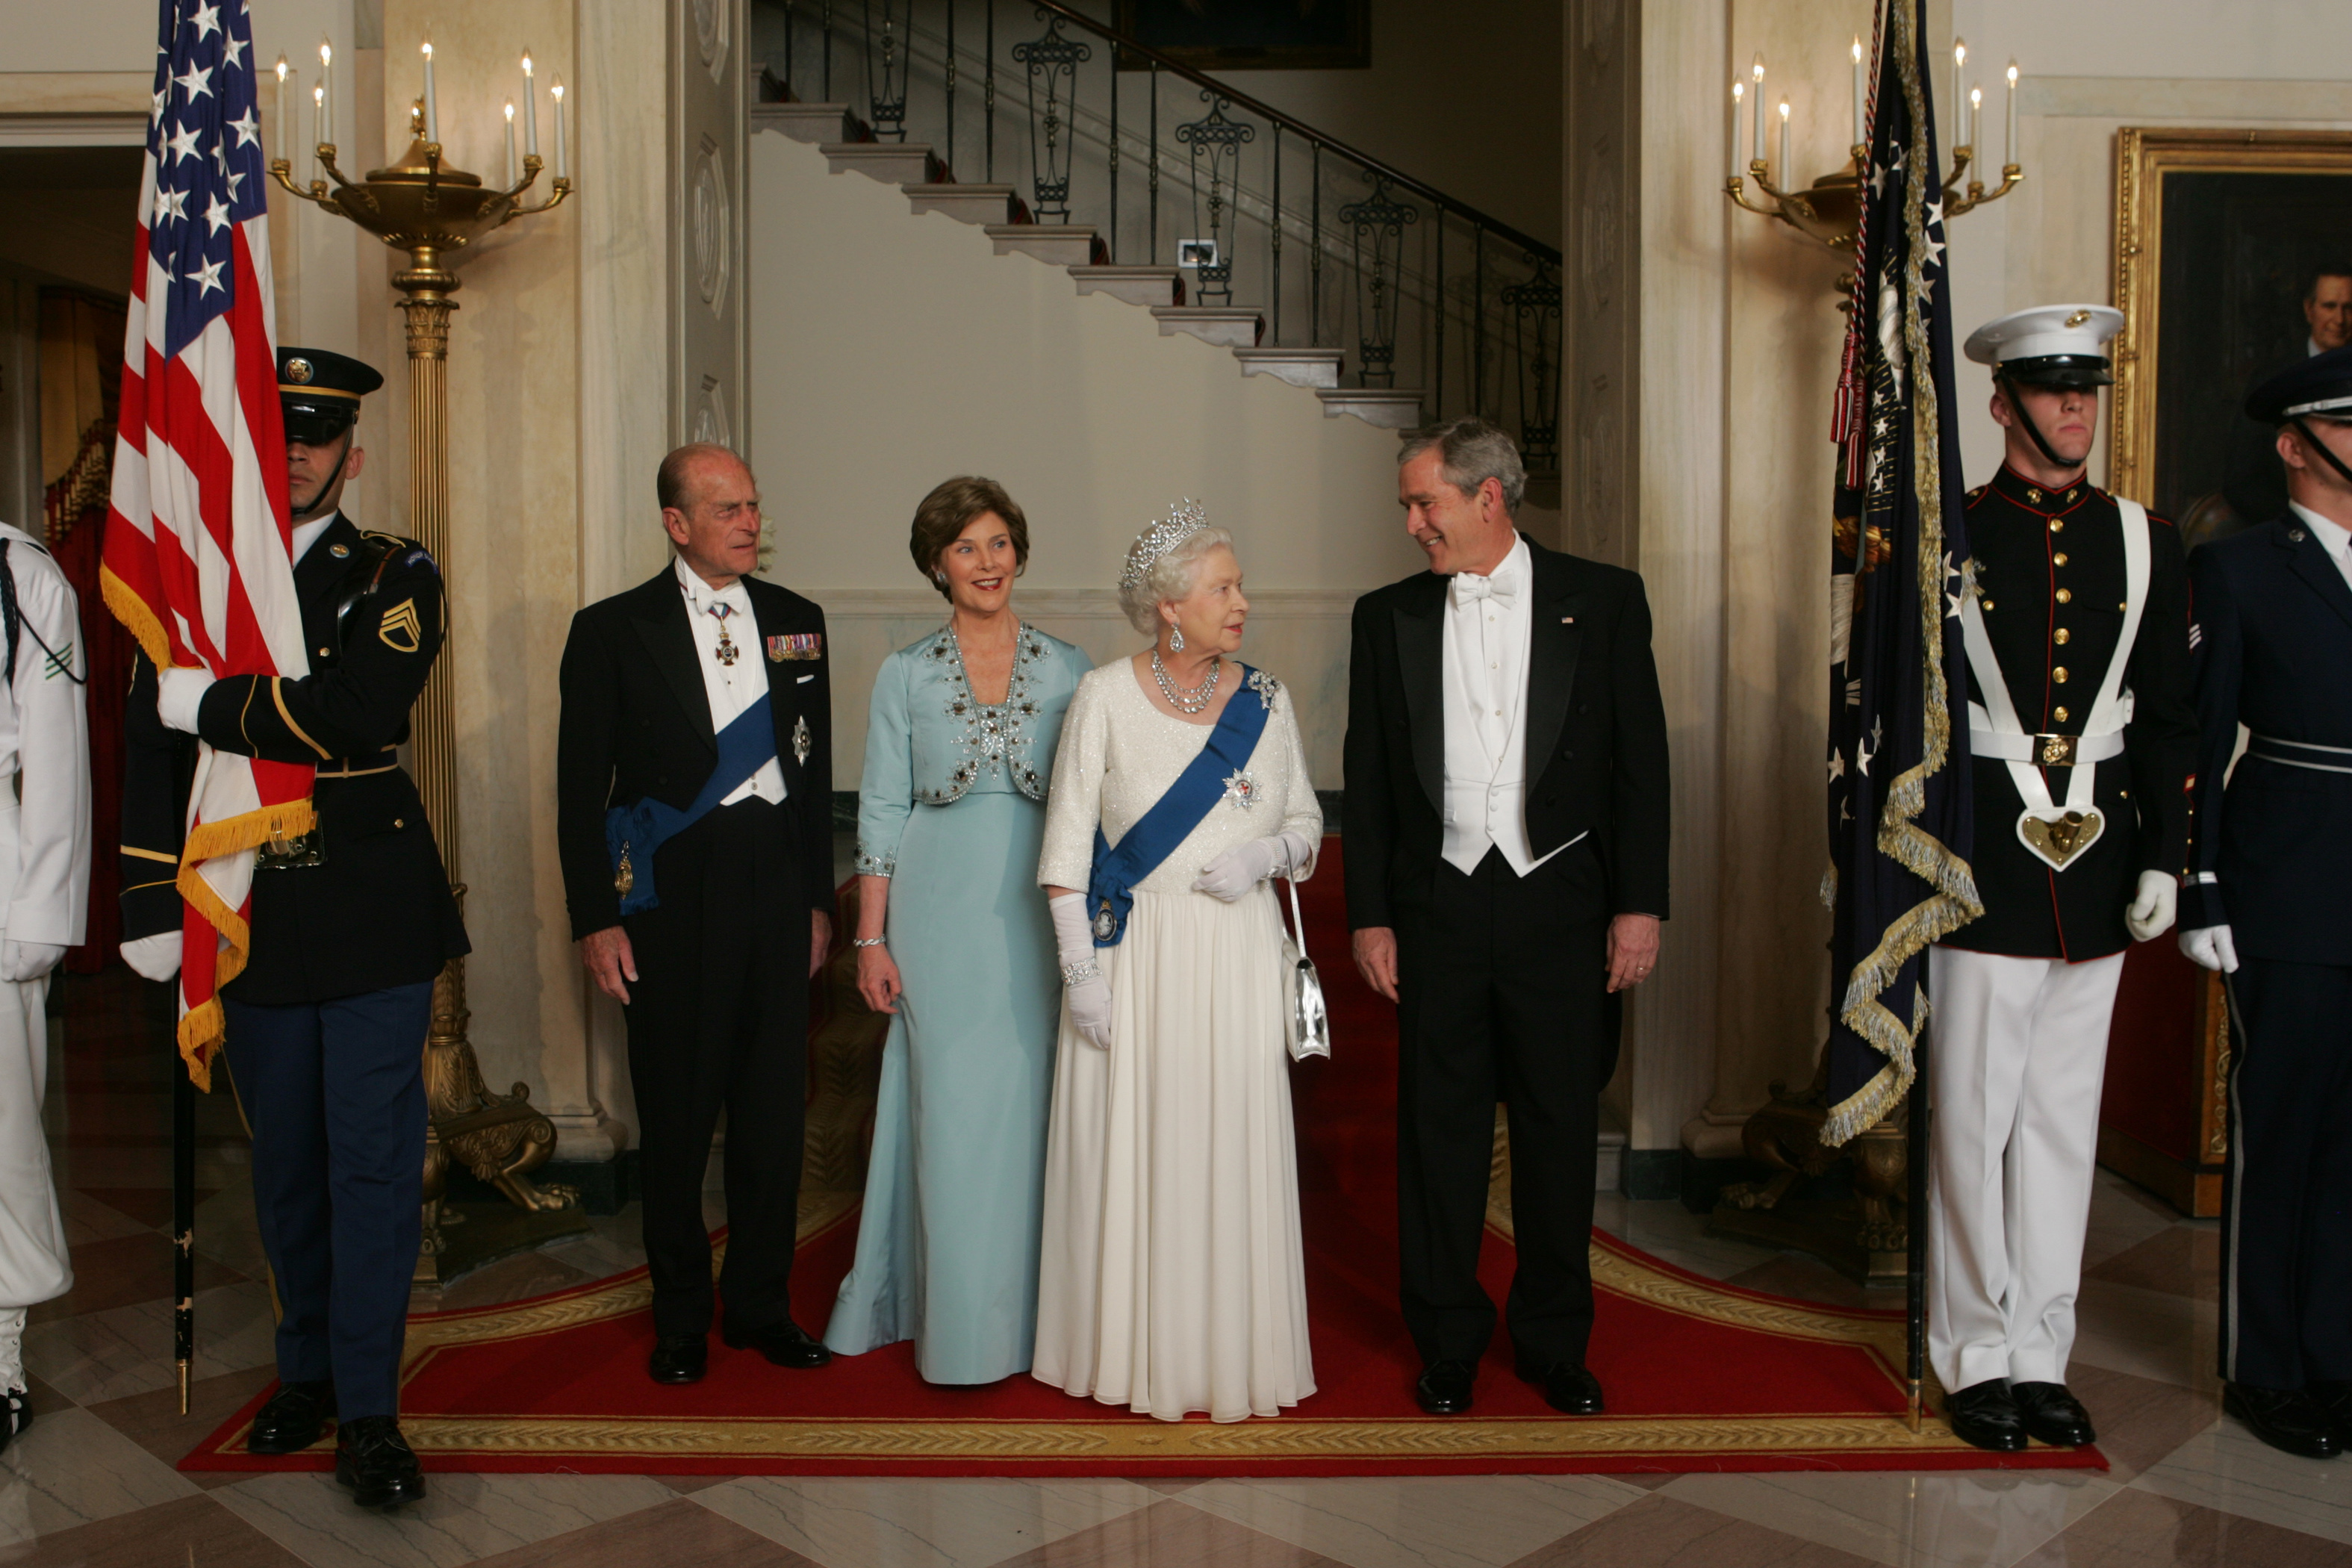 President George W. Bush and Mrs. Laura Bush Escort Her Majesty Queen Elizabeth II and His Royal Highness The Prince Philip, Duke of Edinburgh, from the Grand Staircase.